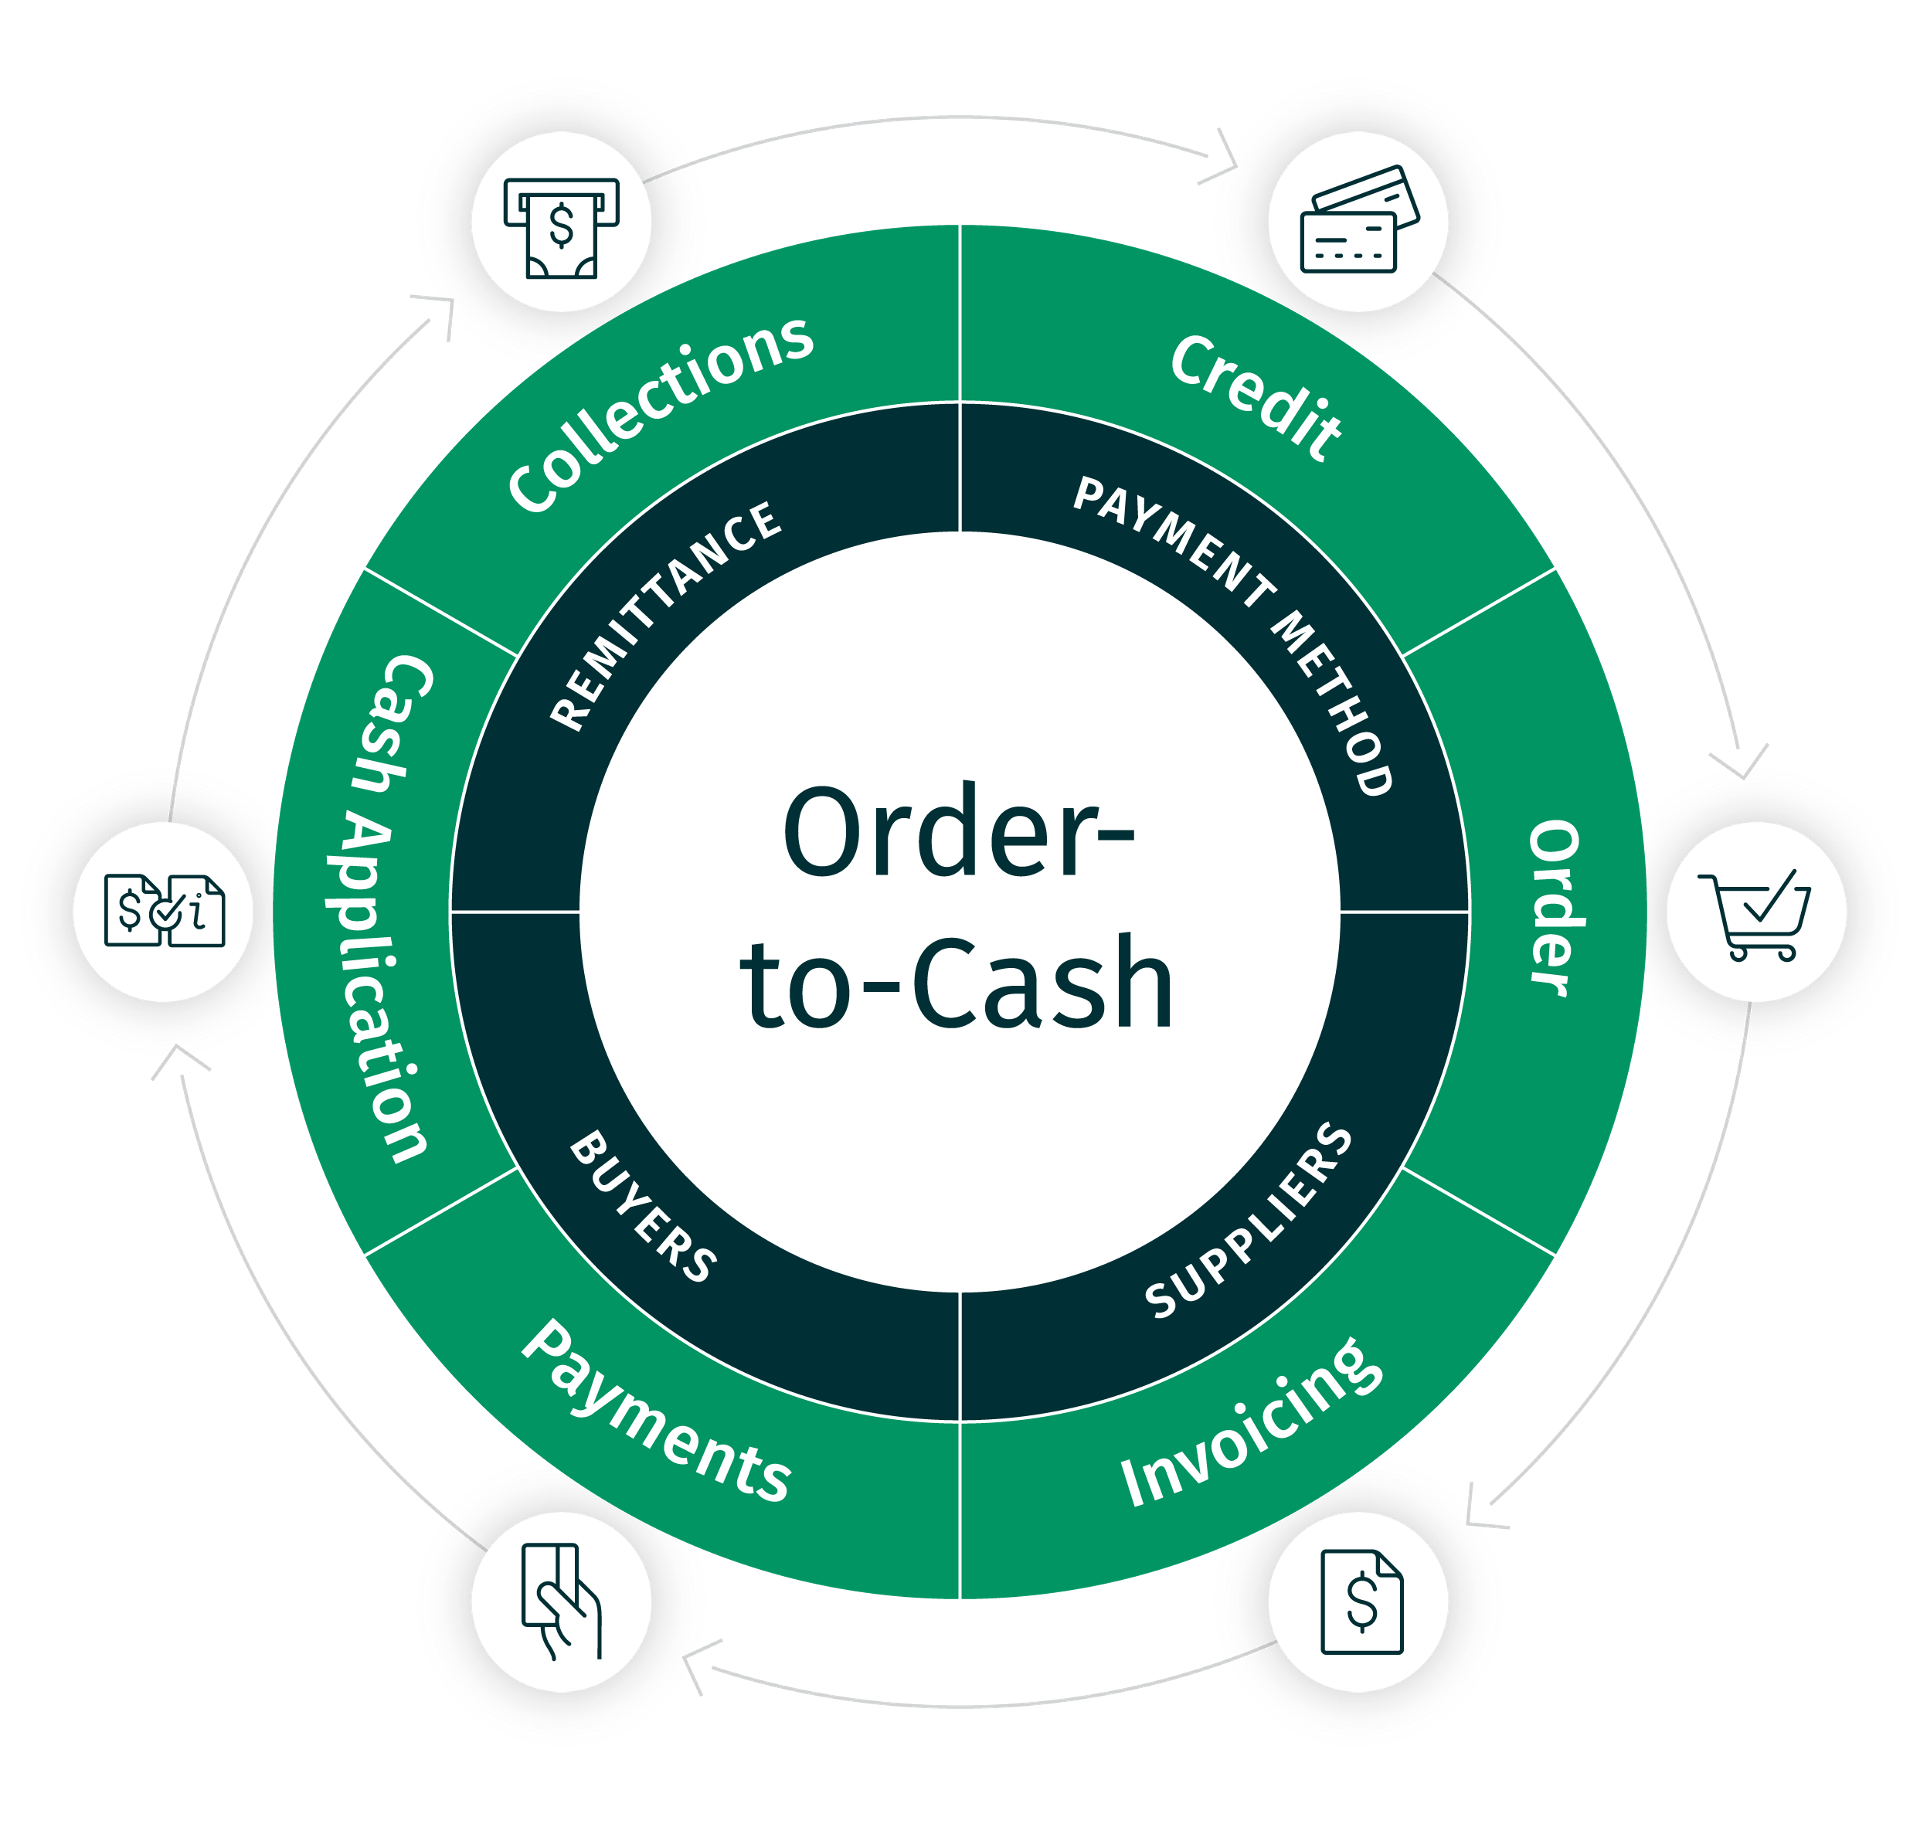 rder-to-cash cycle diagram